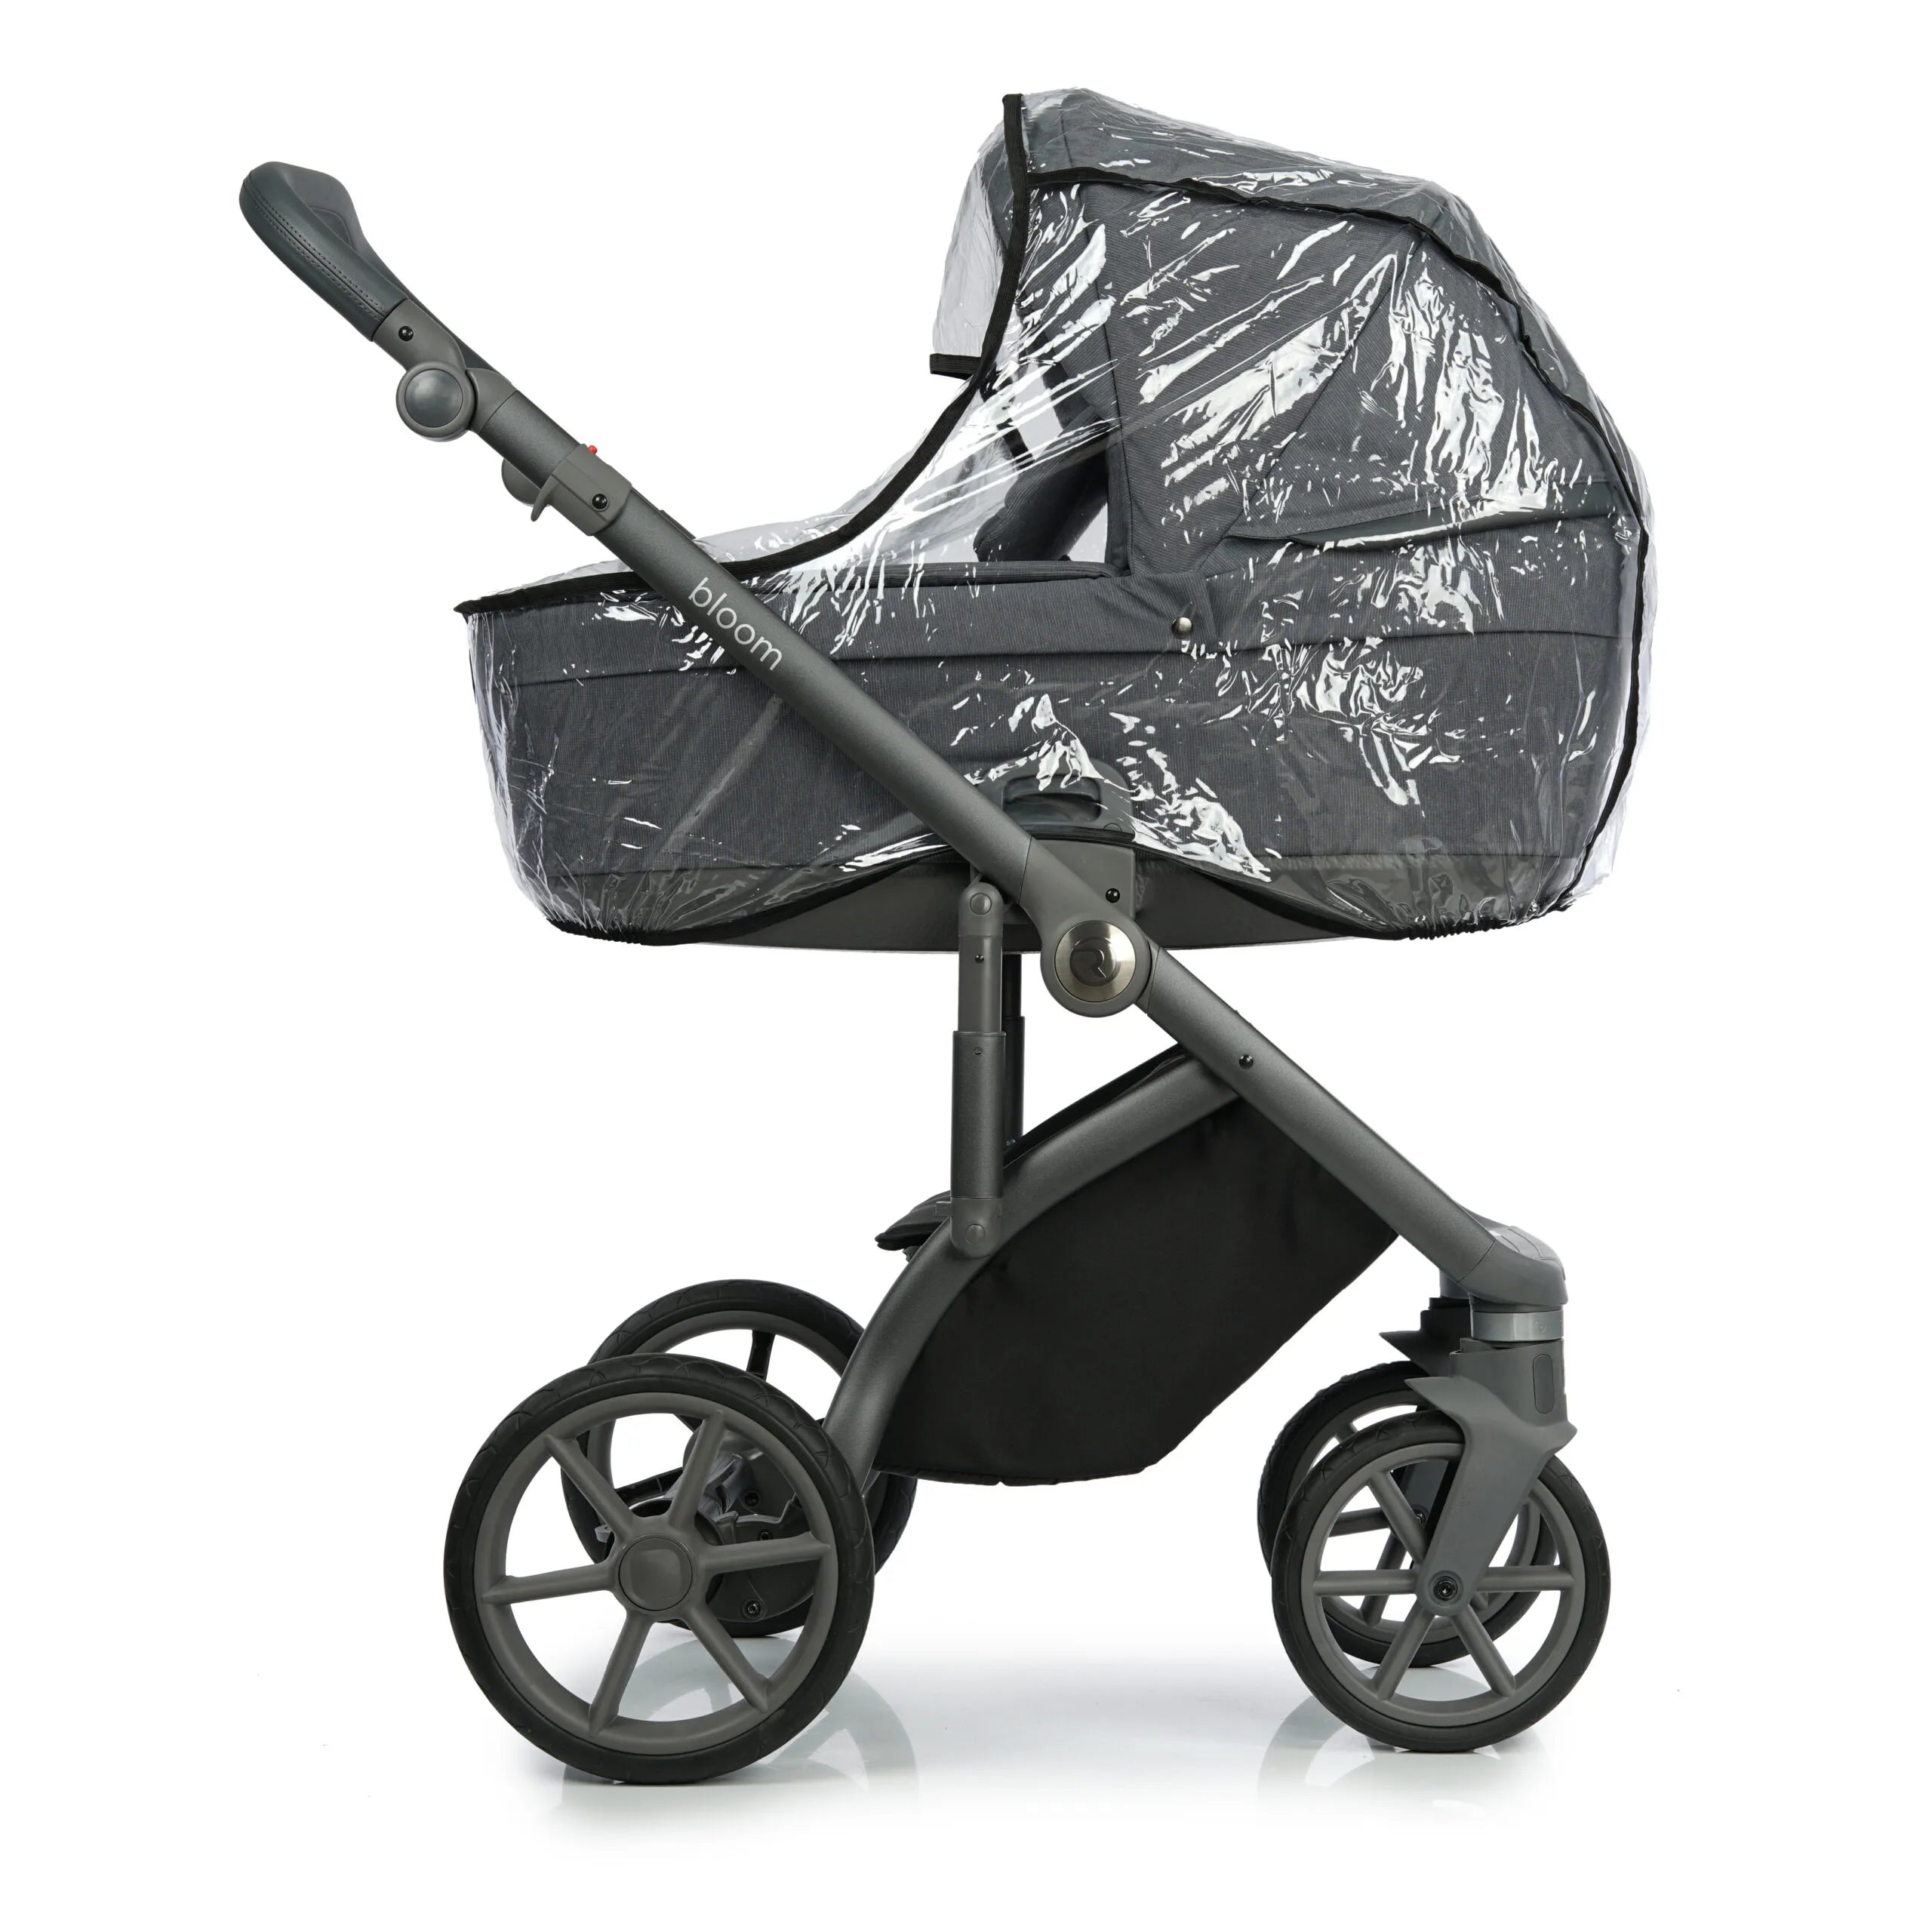 Roan BLOOM baby stroller 2 in 1, carry cot and stroller, color Titanium